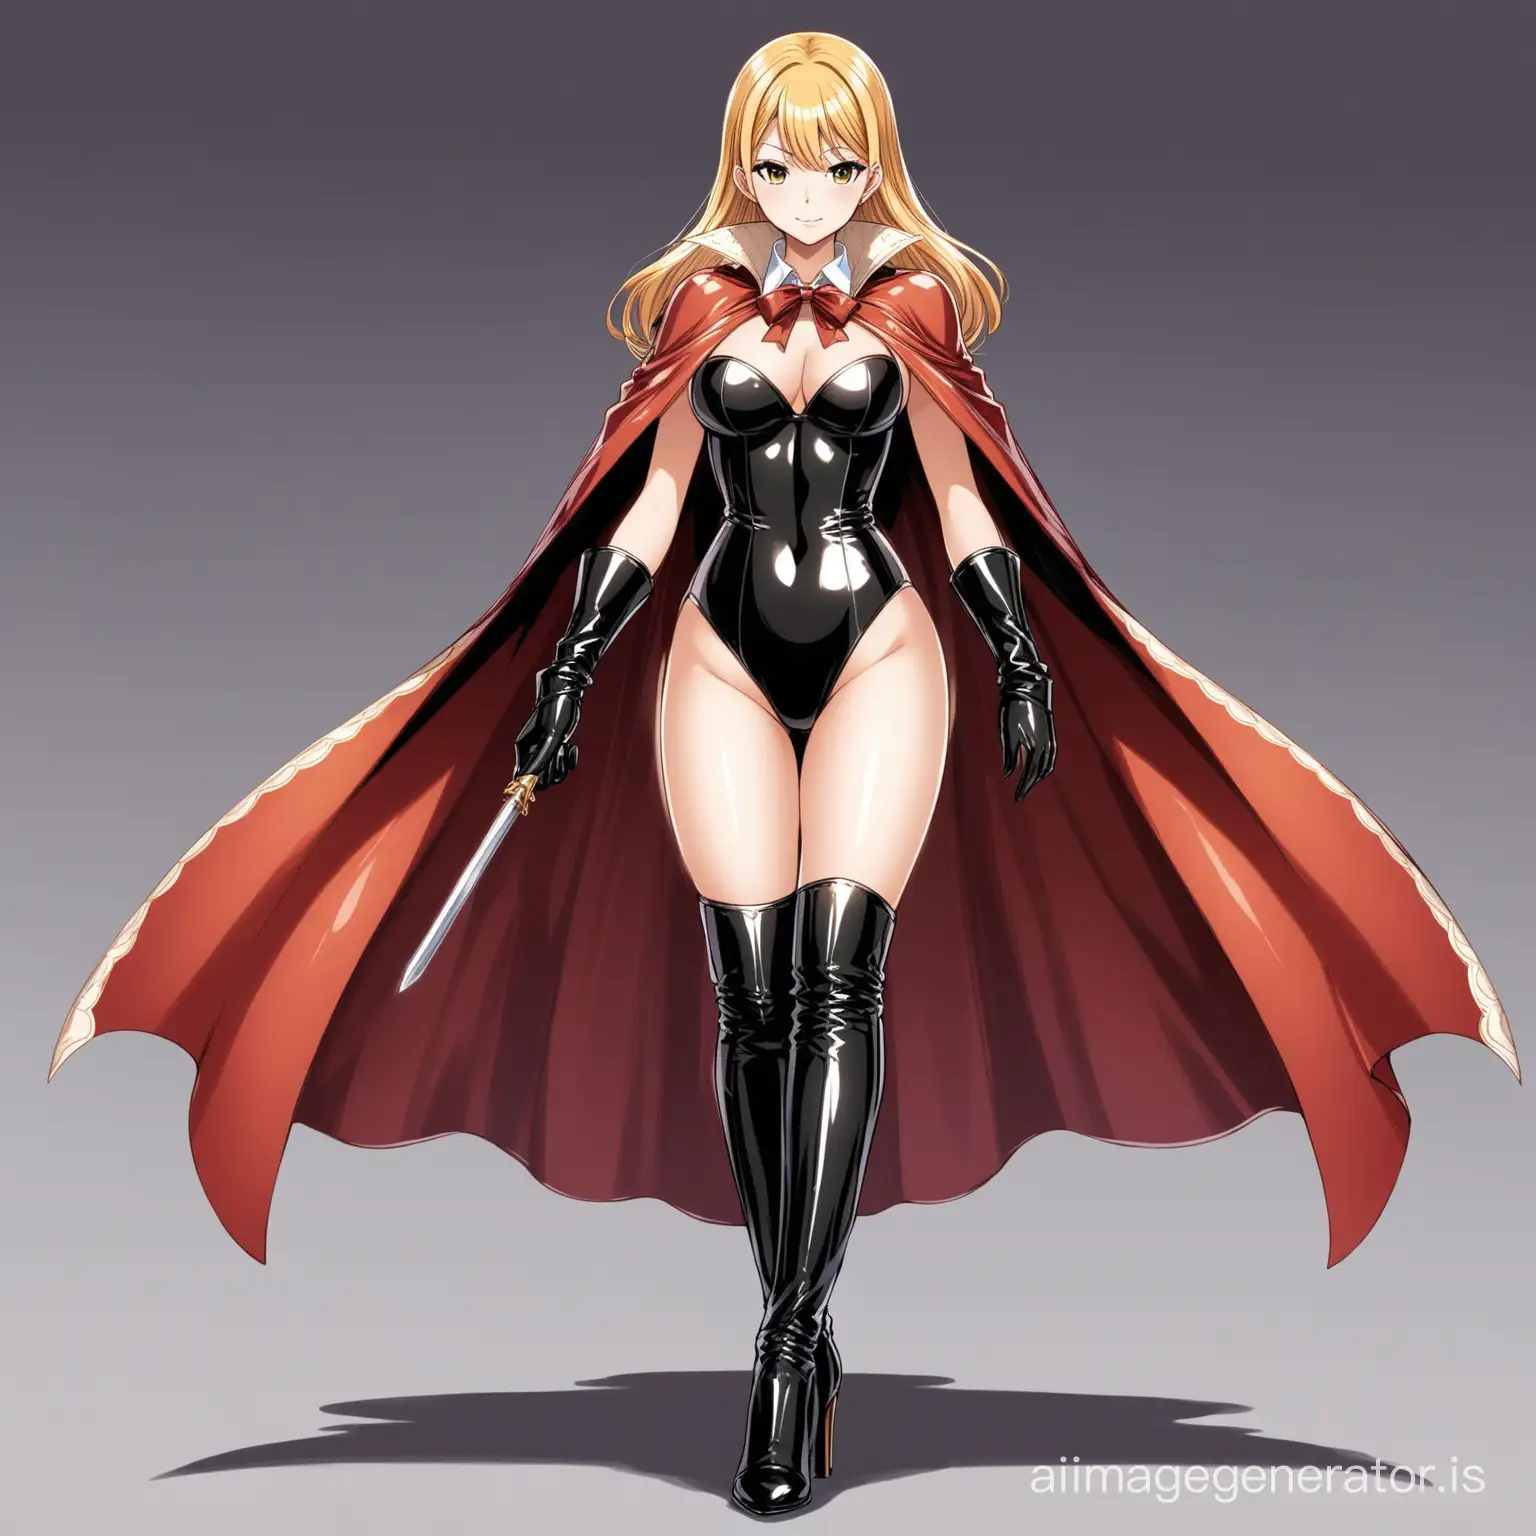 Elegant-Princess-Anime-Girl-in-Leather-Gloves-and-Boots-with-Collared-Cape